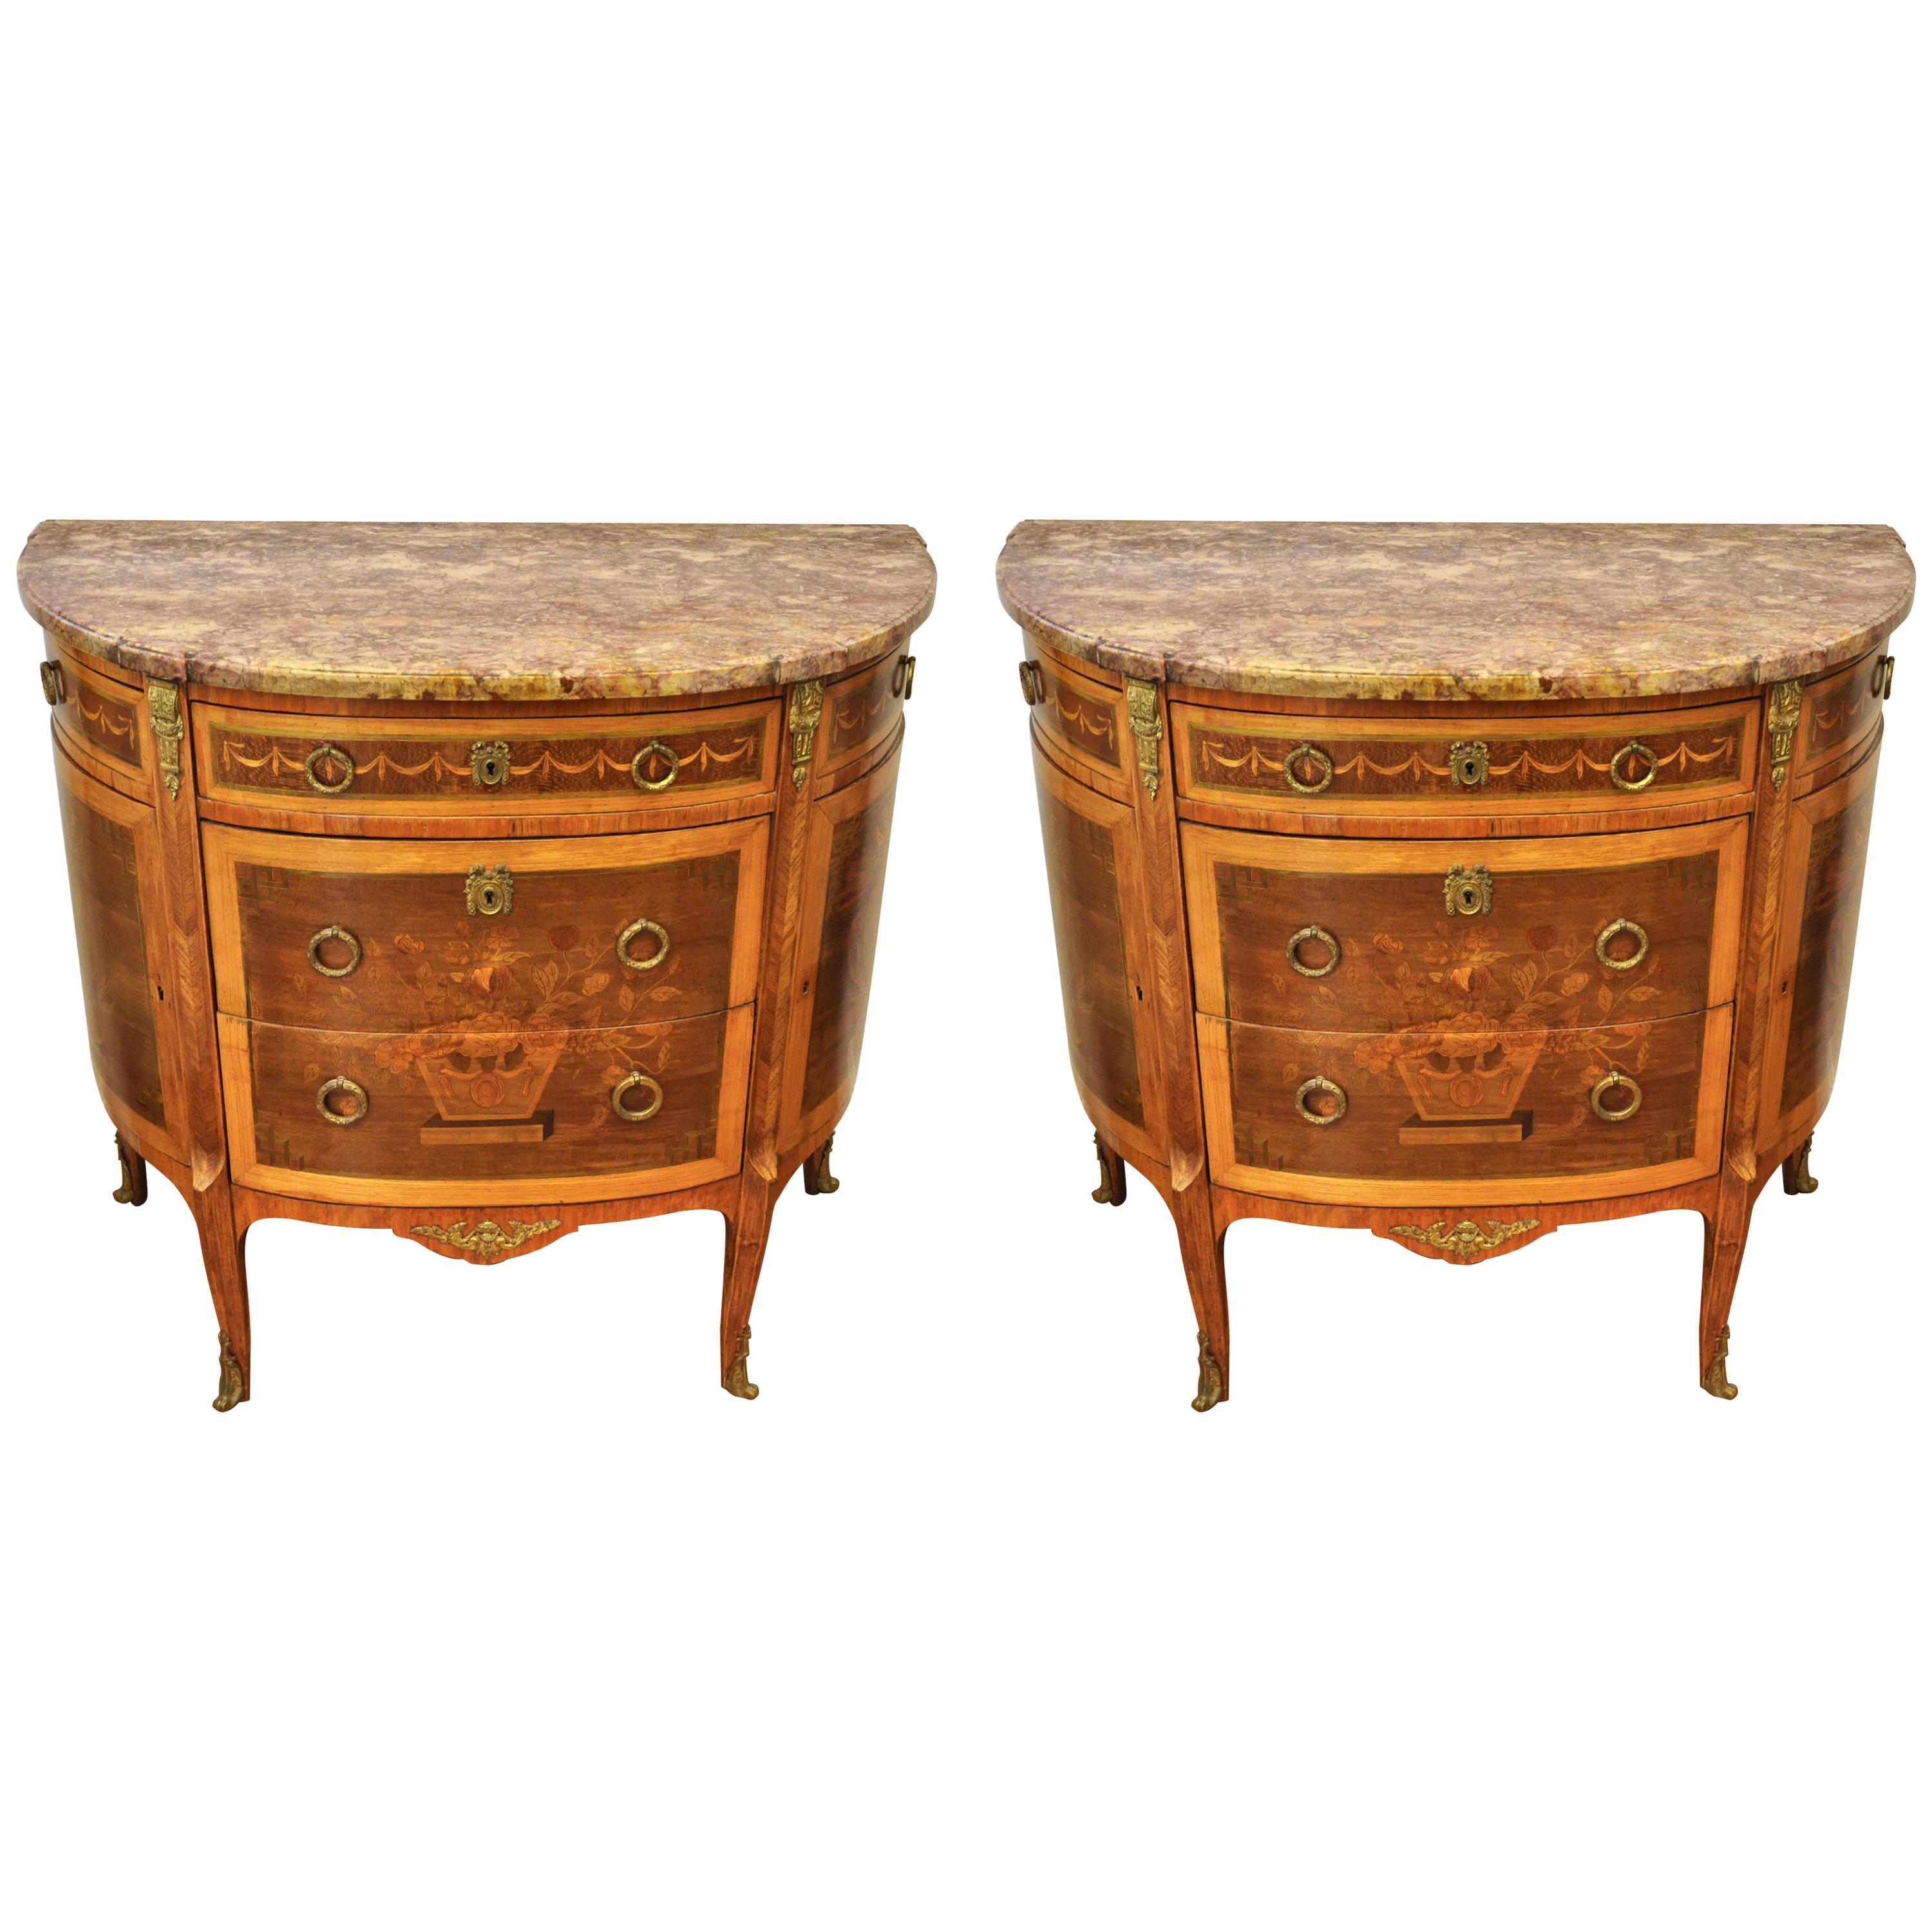 Pair of Louis XVI Style Marble-Top Marquetry Inlaid Commodes For Sale